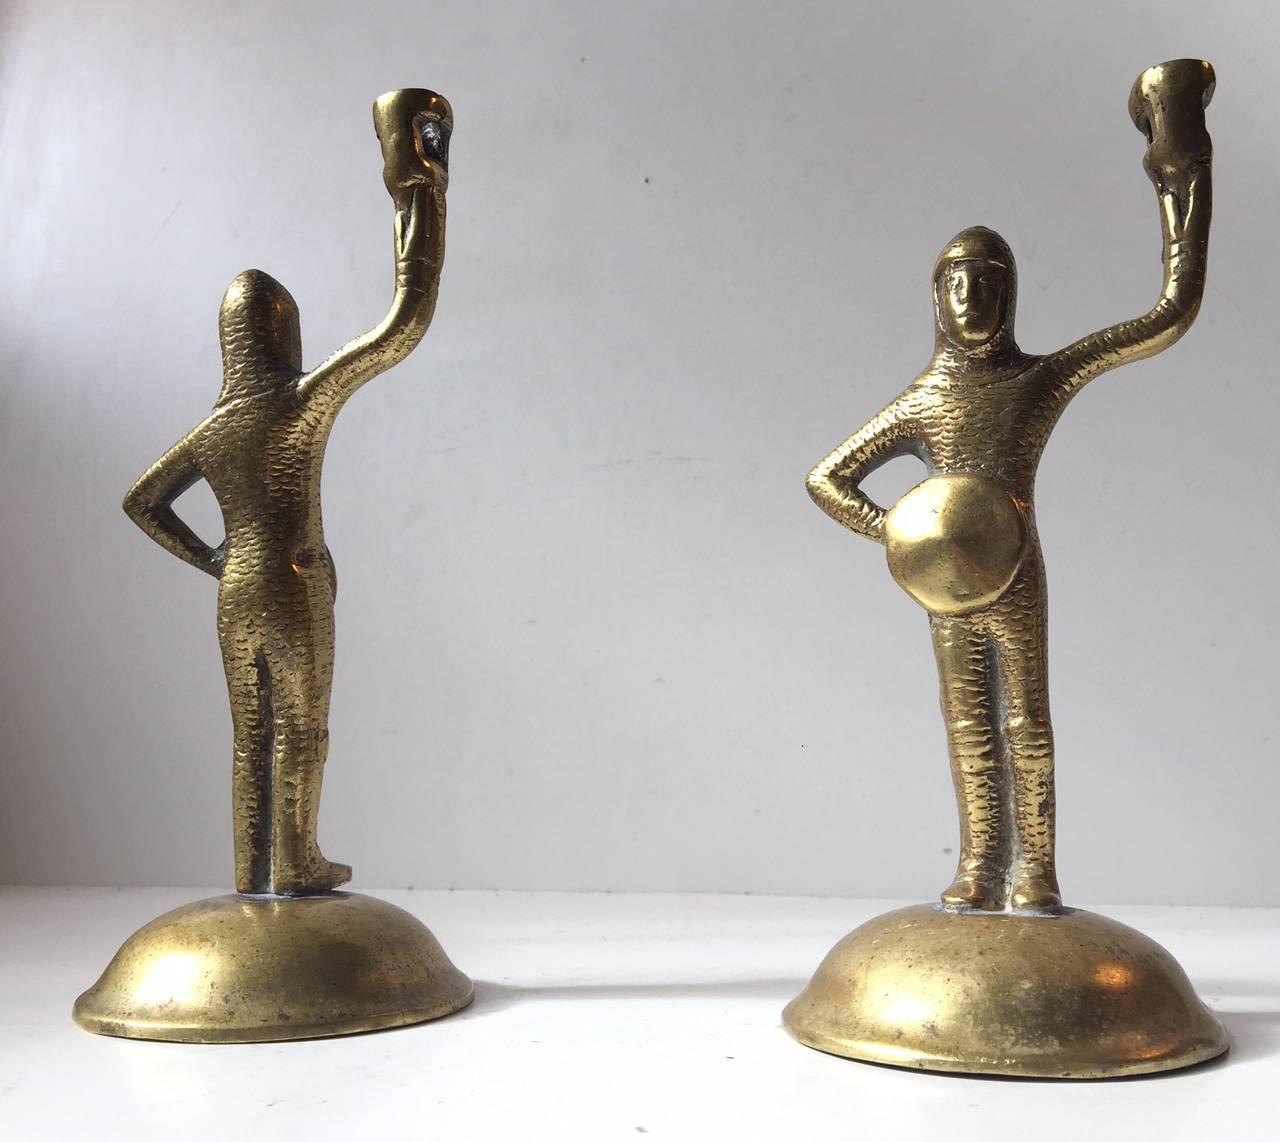 Pair of 19th century brass figural candlesticks in shape of Arthurian knights of the middle Ages in full Armor holding their shields. These are to be fitted with small candles (Diameter 1 cm). The surface of the pair has been polished to a shine.